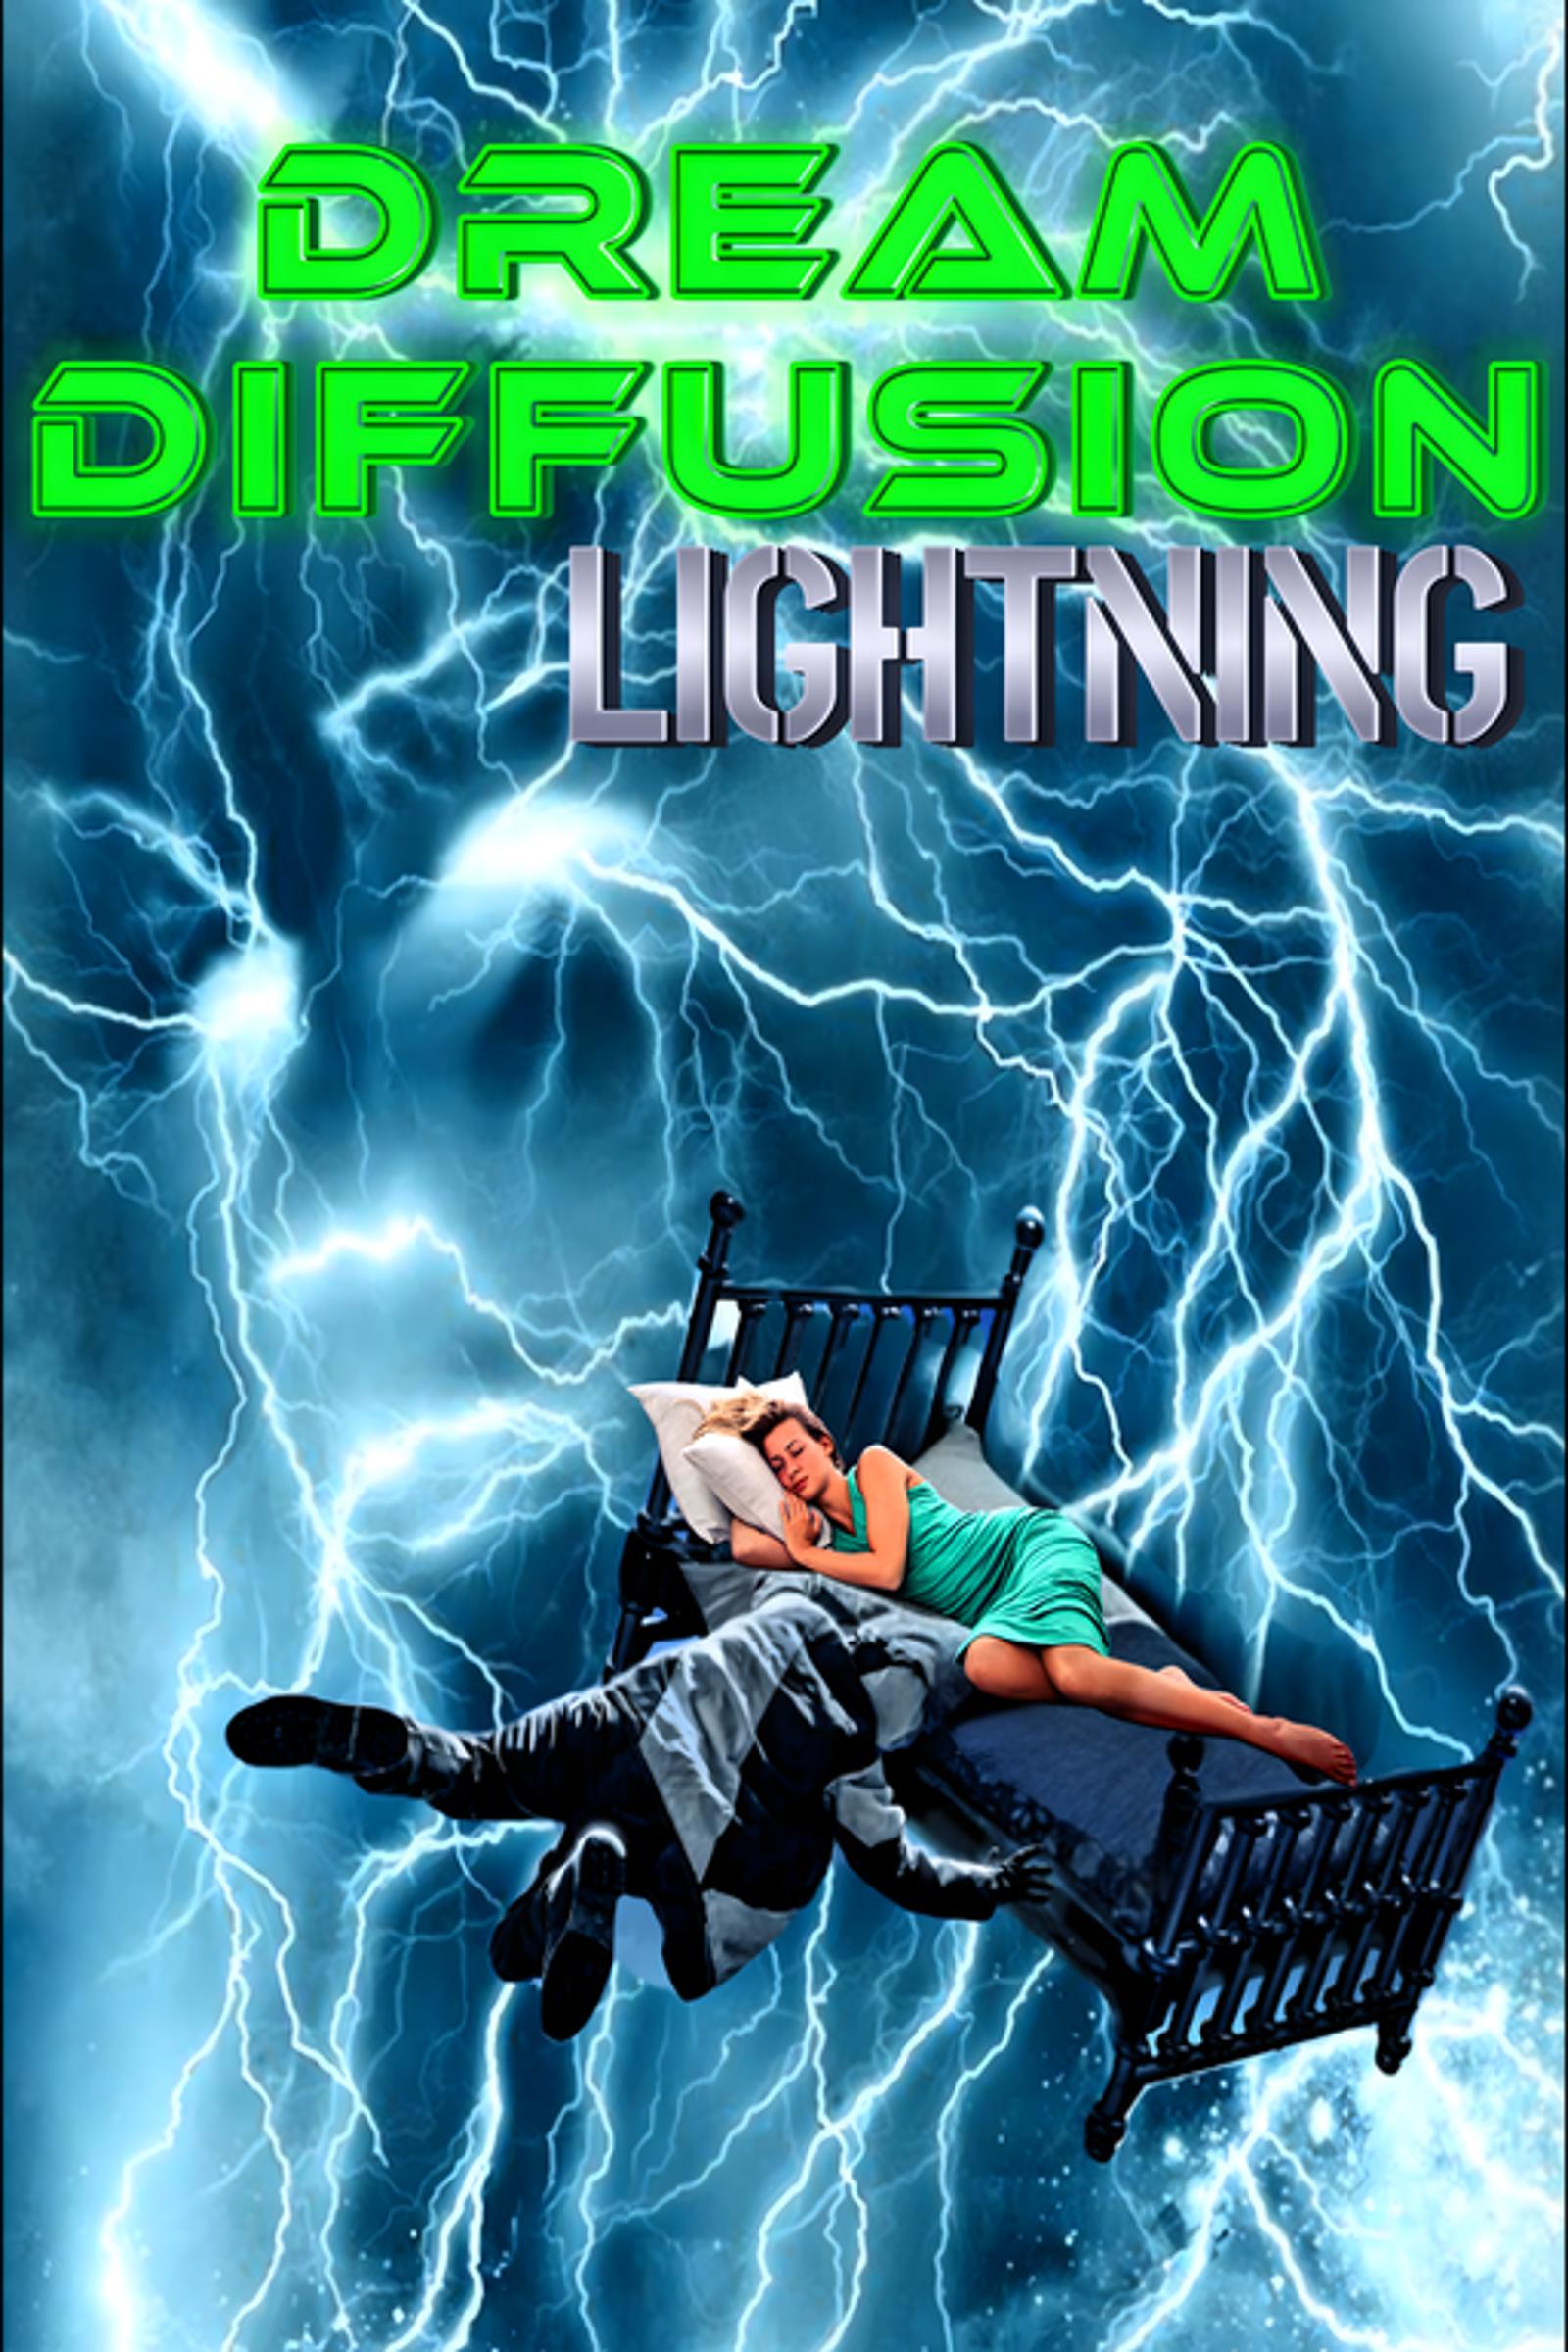 LIGHTNING XL DREAM DIFFUSION Fastest Most Detailed Checkpoint EVER Is Now Available On Civitai